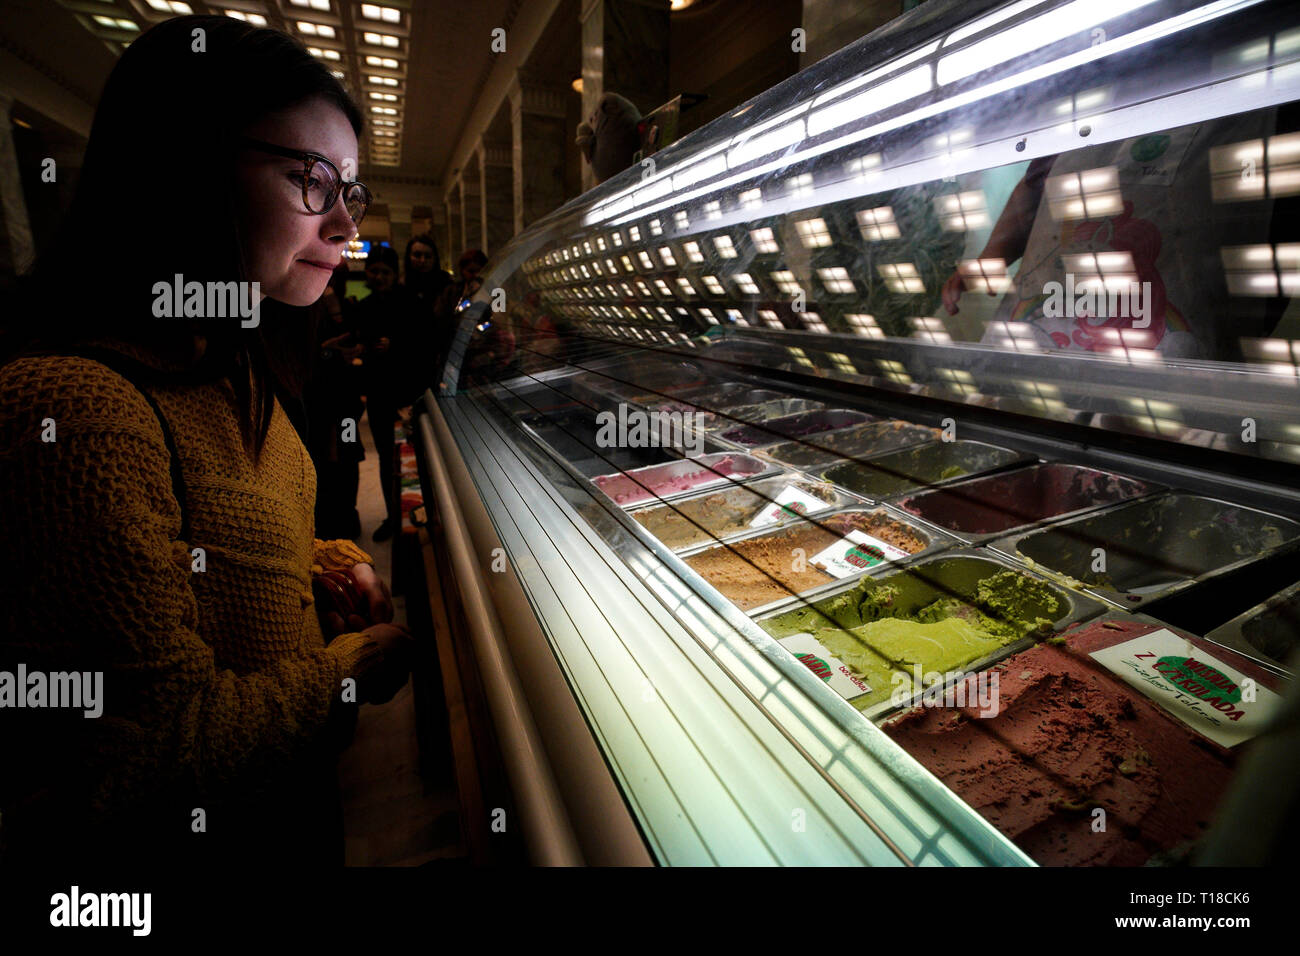 Warsaw, Poland. 24th Mar, 2019. A woman selects vegan ice cream during the Vegan Food Festival in Warsaw, Poland, on March 24, 2019. Credit: Jaap Arriens/Xinhua/Alamy Live News Stock Photo